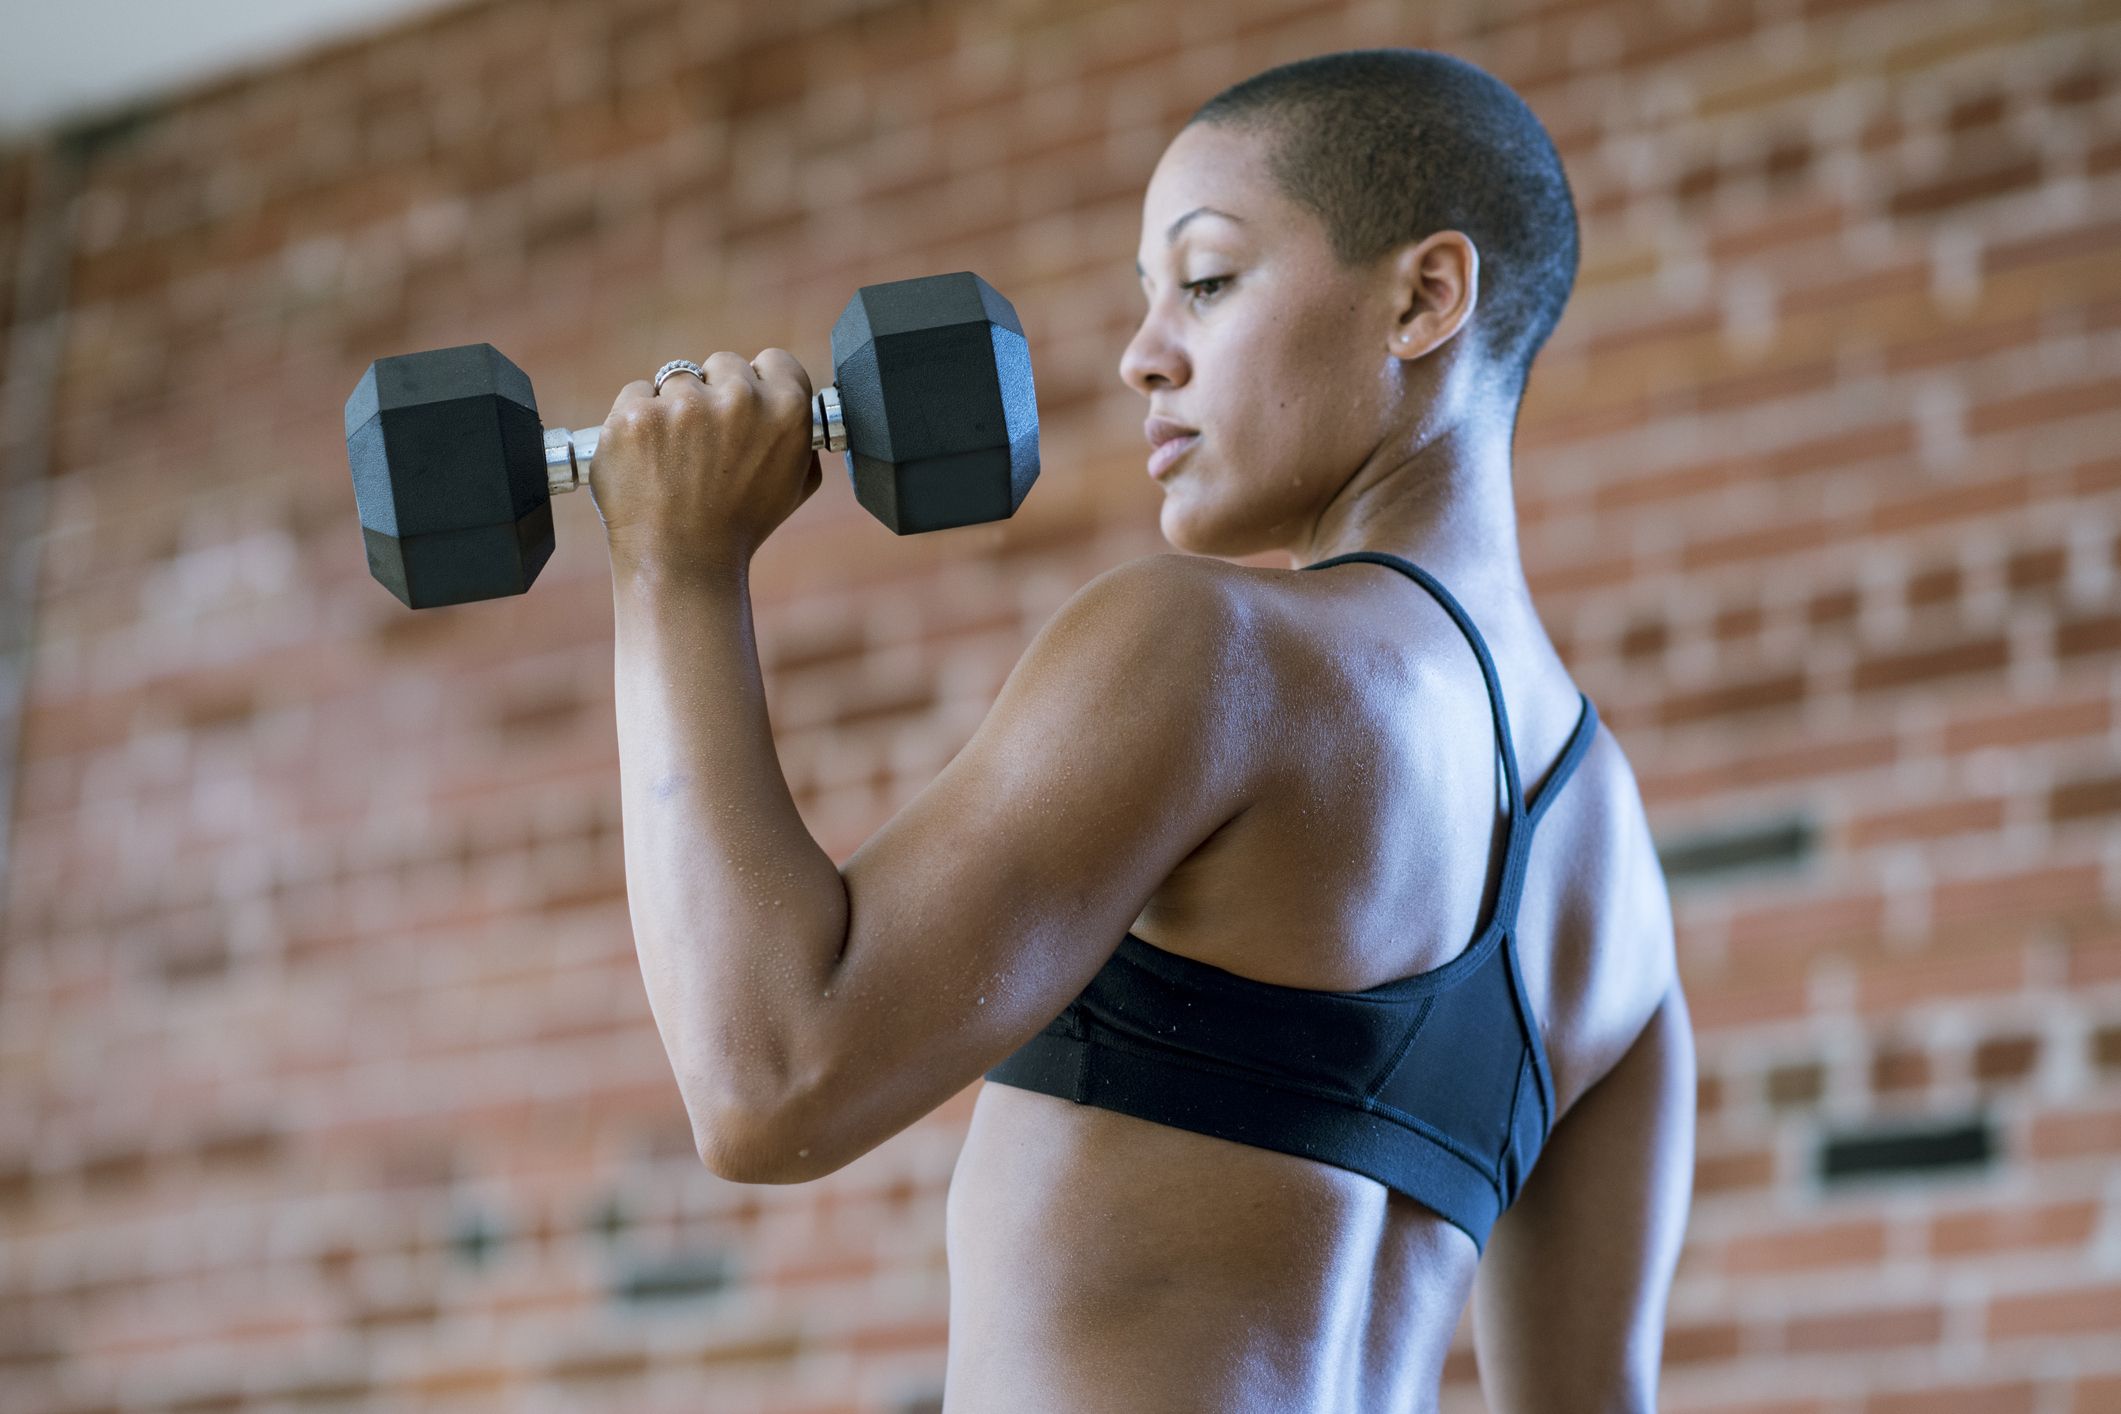 The Beginner's Guide to Weight Training